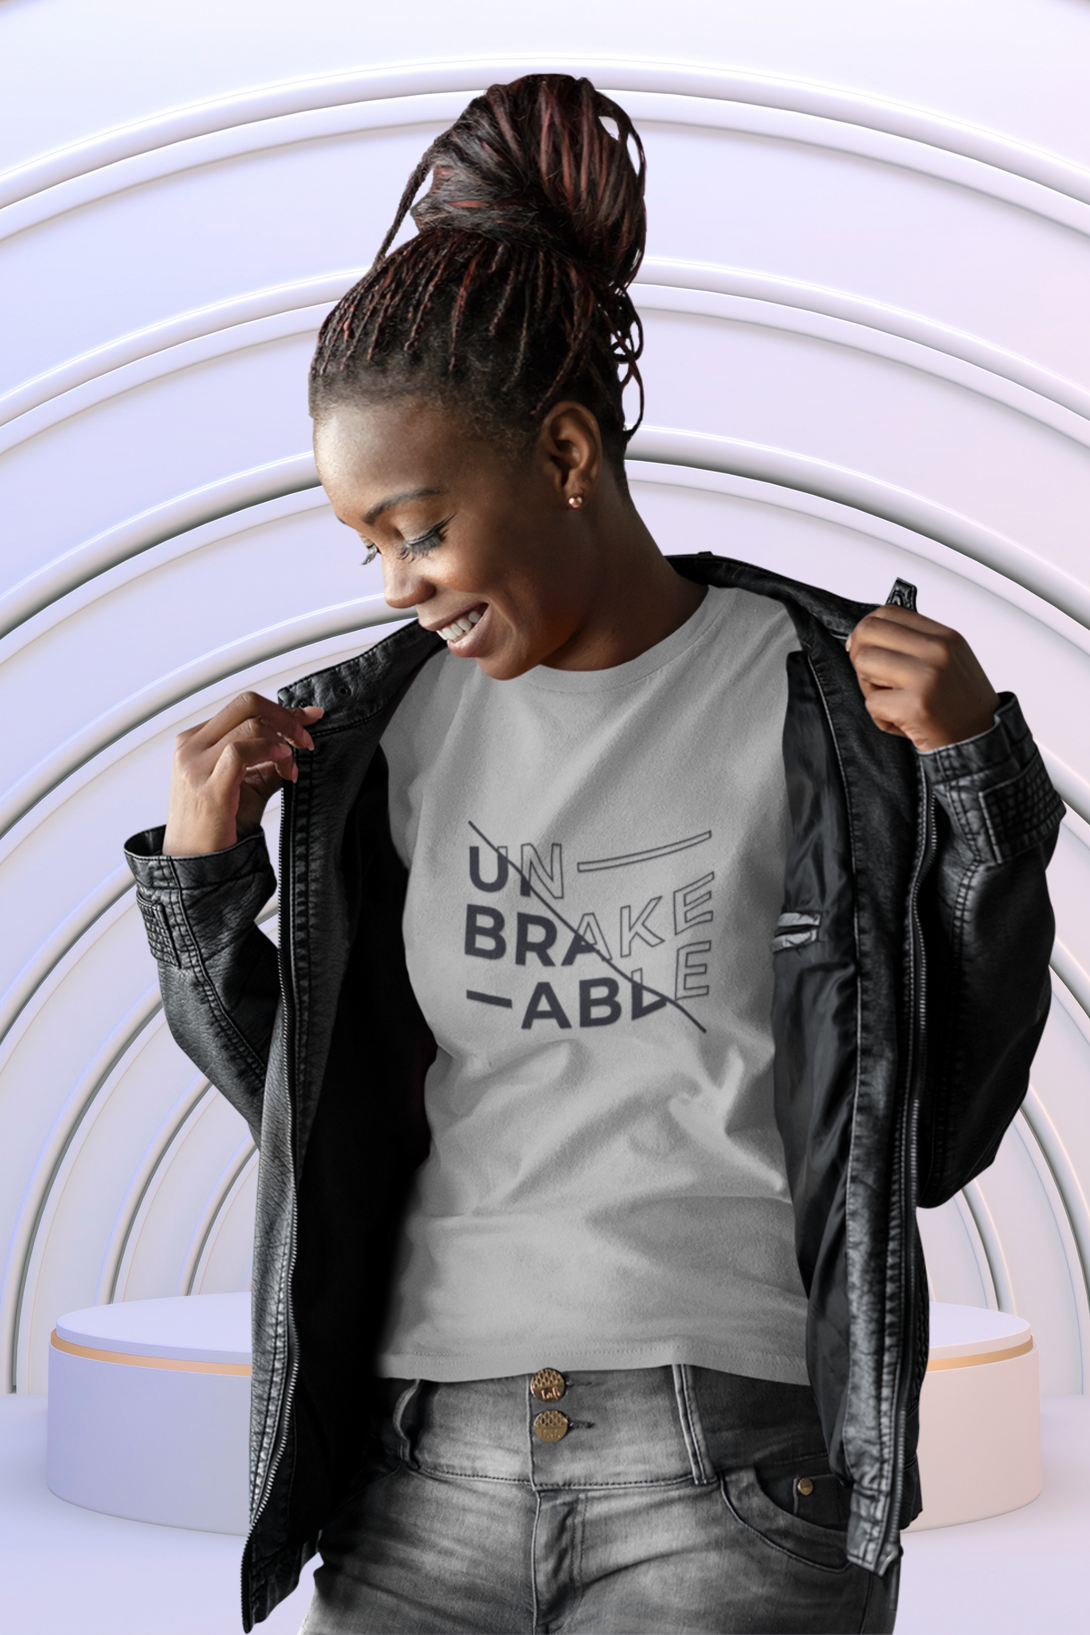 Unbreakable Printed T-Shirt For Women - WowWaves - 4